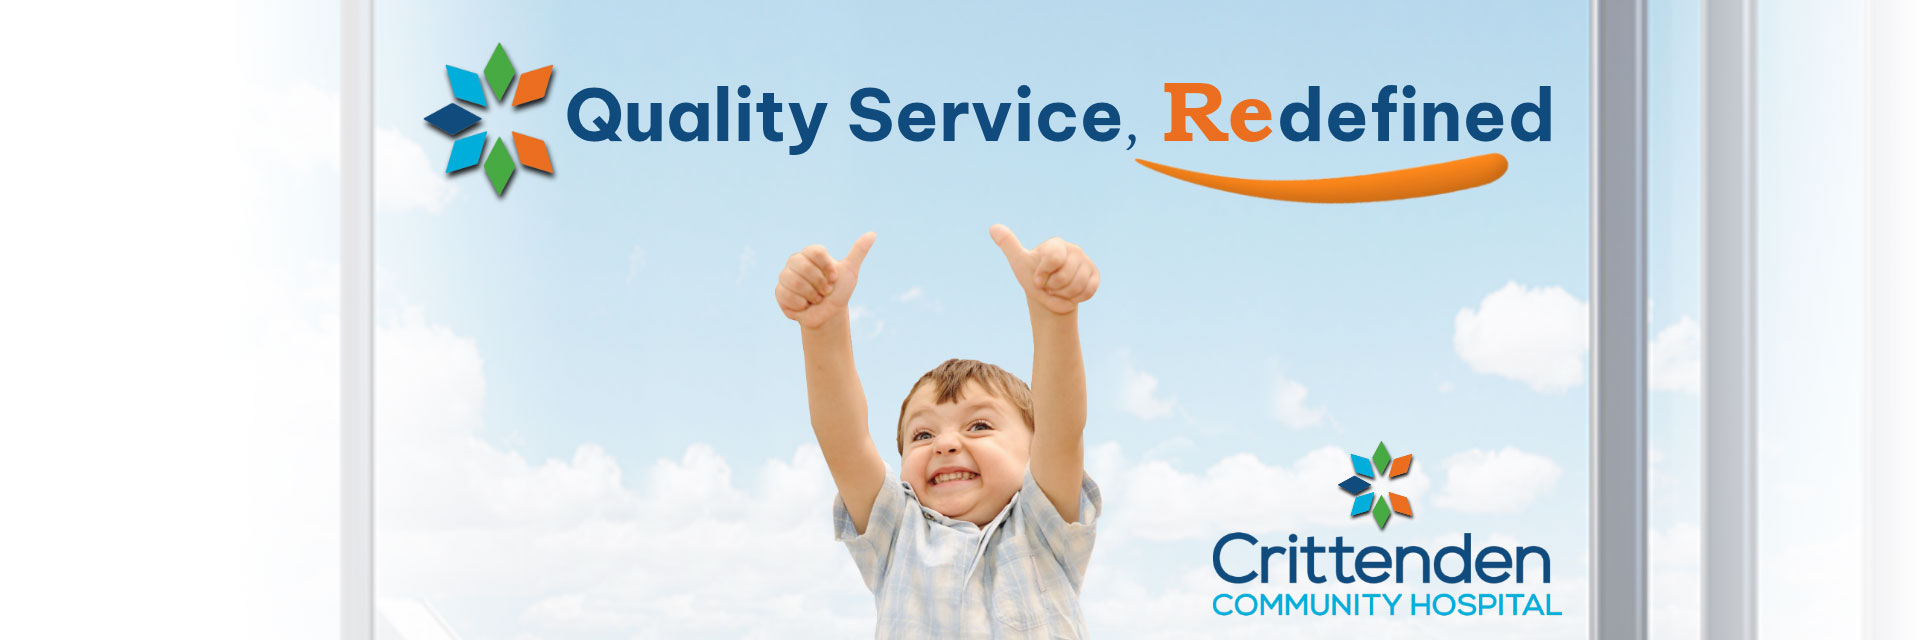 Quality Services, Redefined
Crittenden Community Hospital